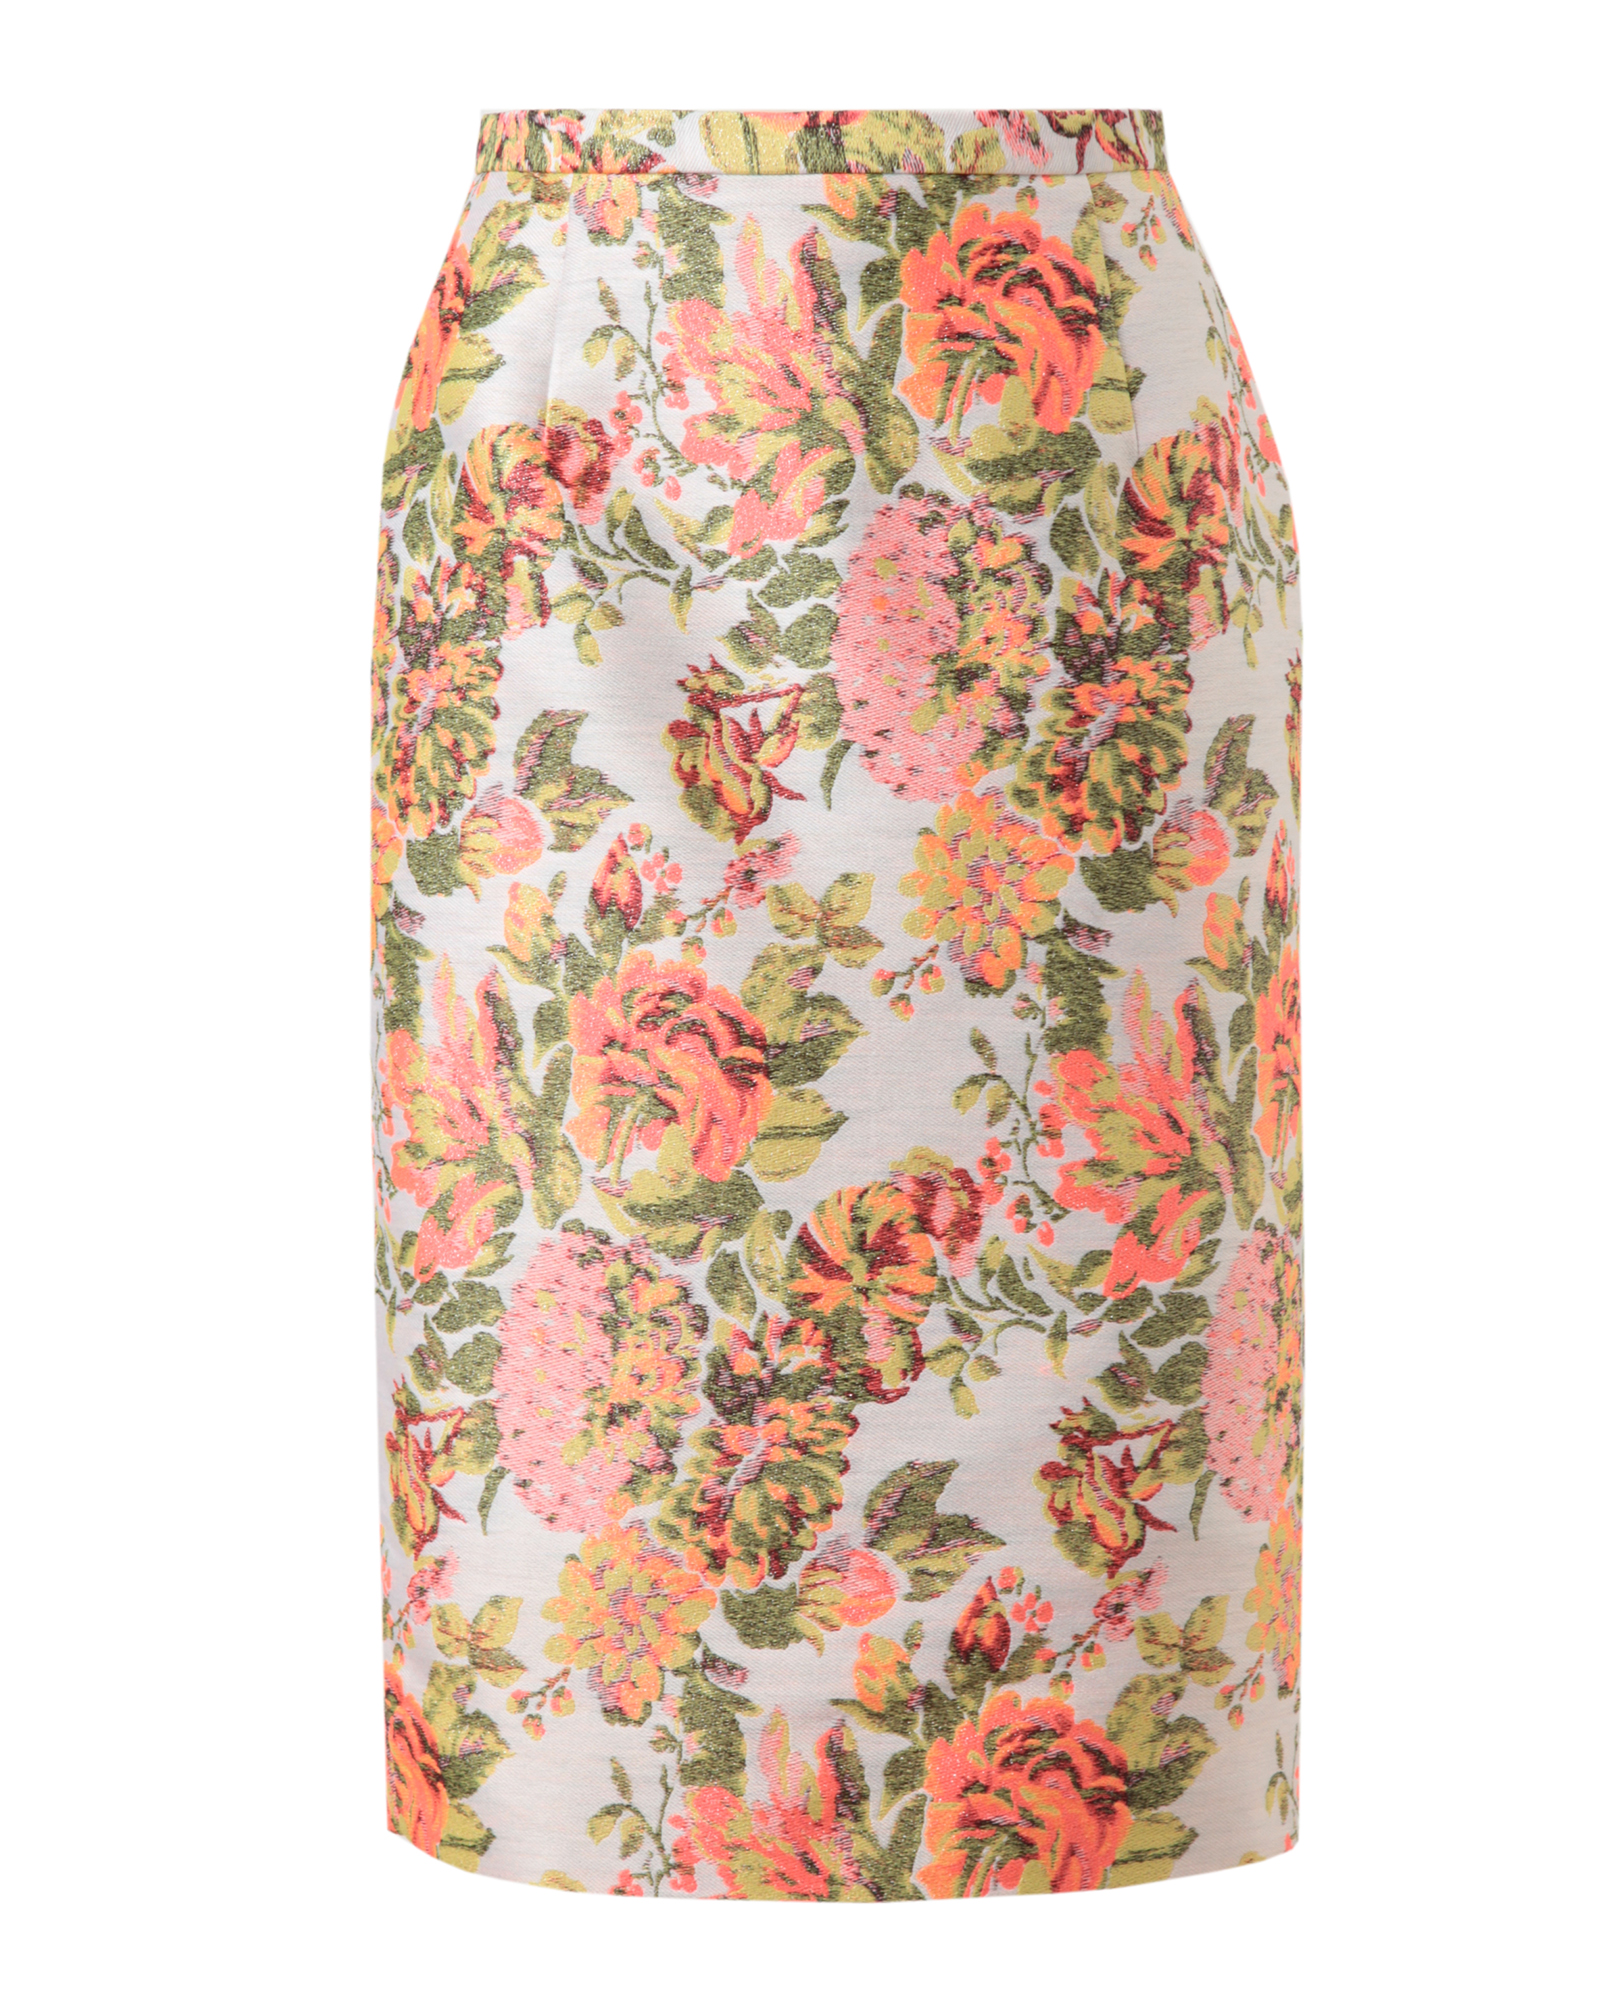 Stella Mccartney Floral Brocade Tailored Pencil Skirt in Multicolor | Lyst